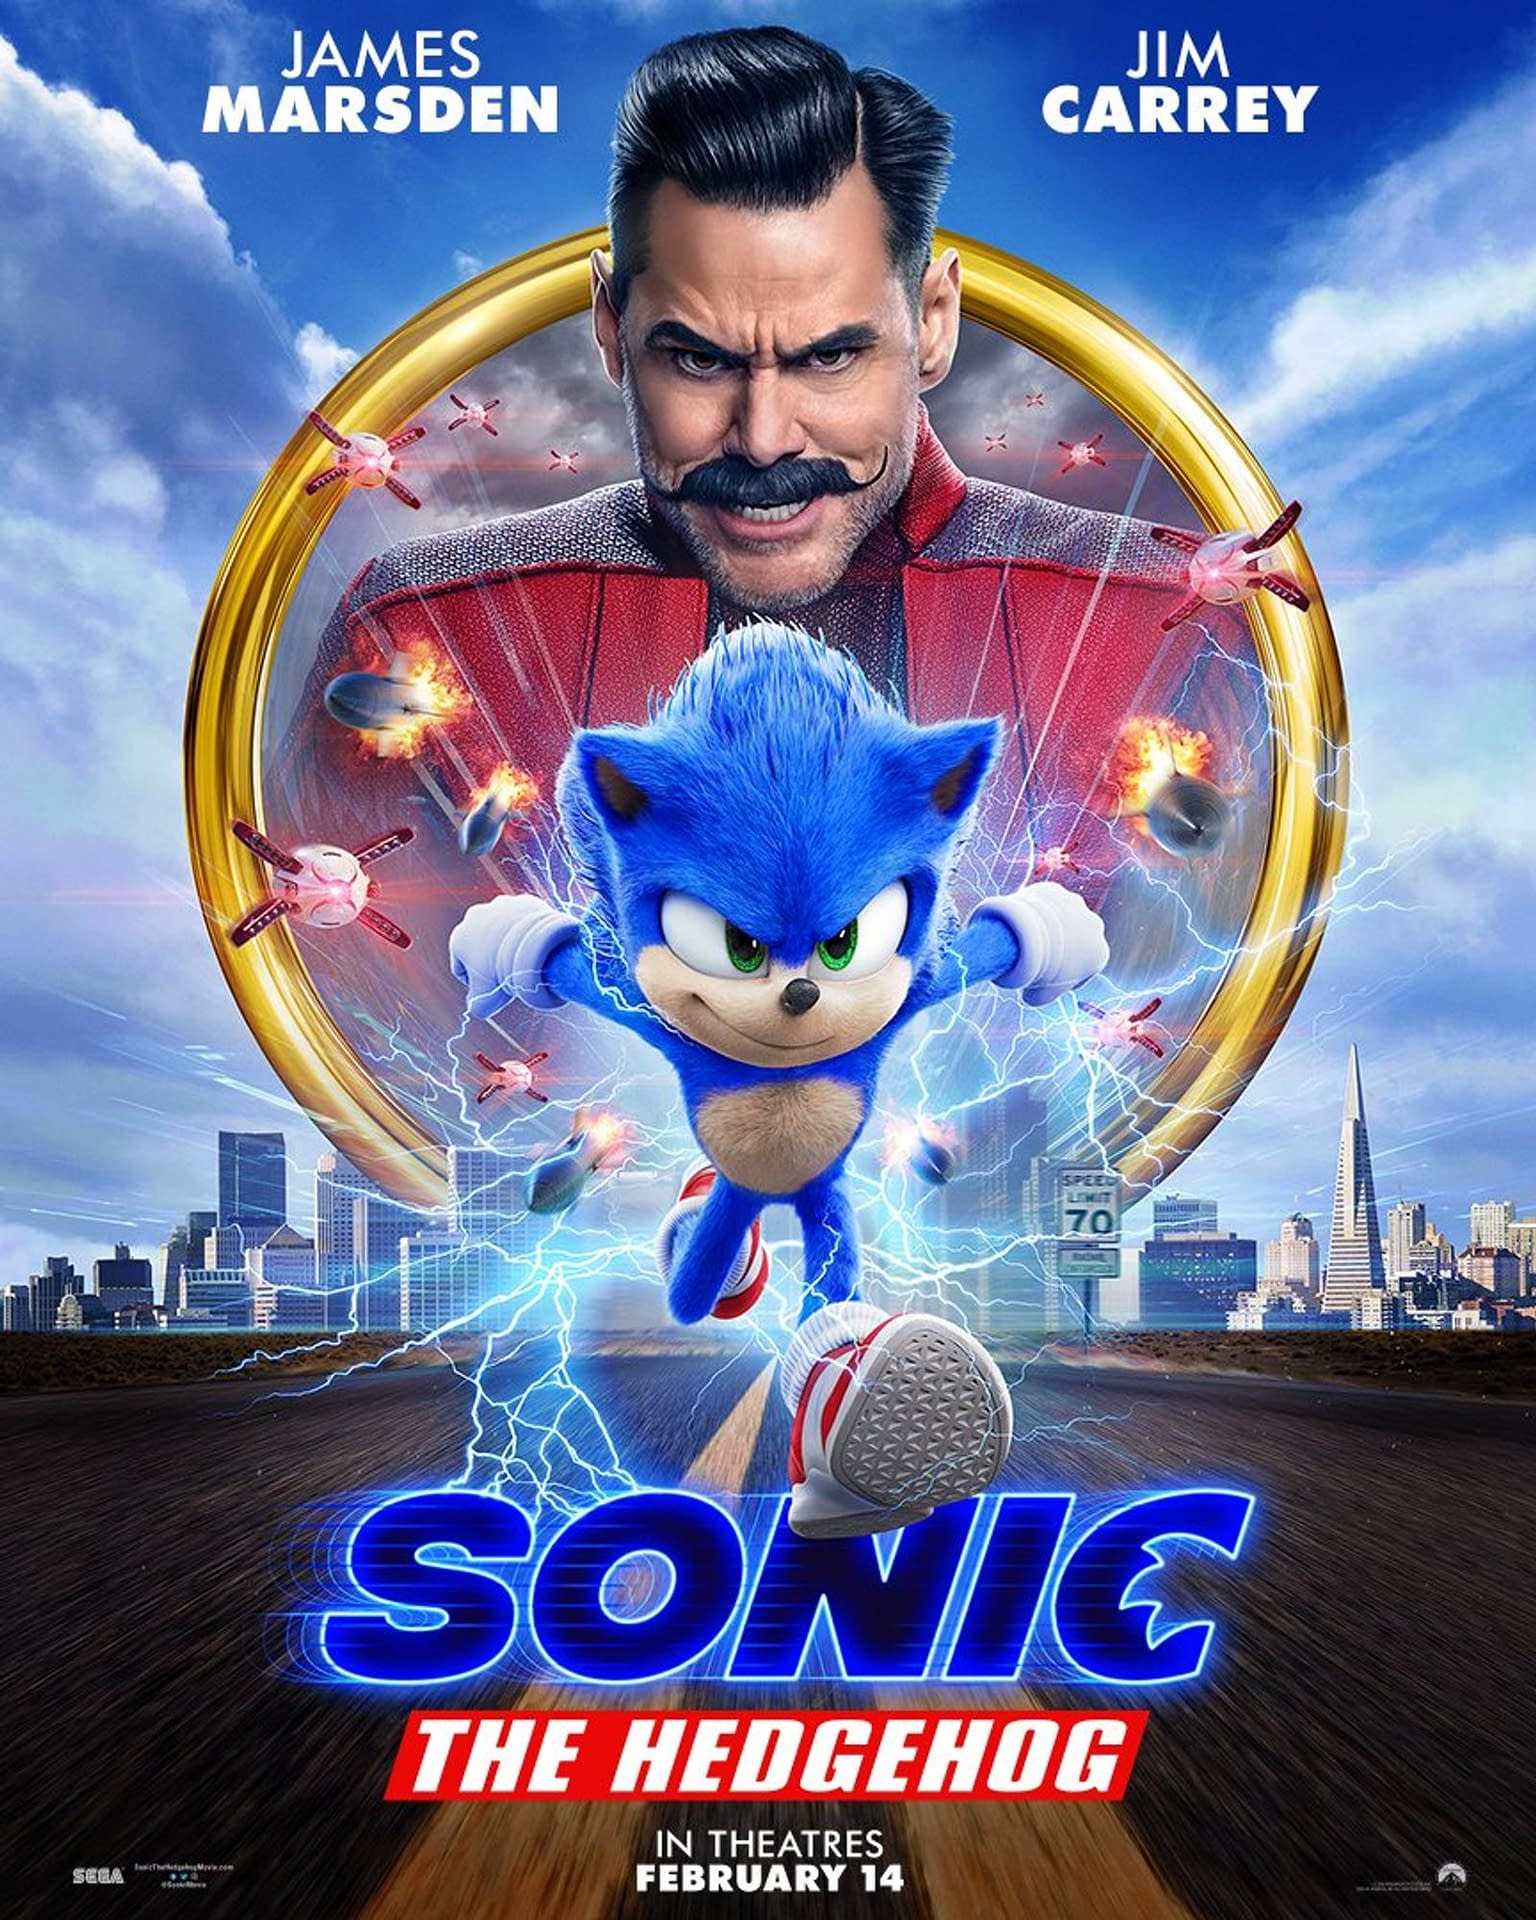 Second "Sonic" Trailer Displays New Designs and More Content